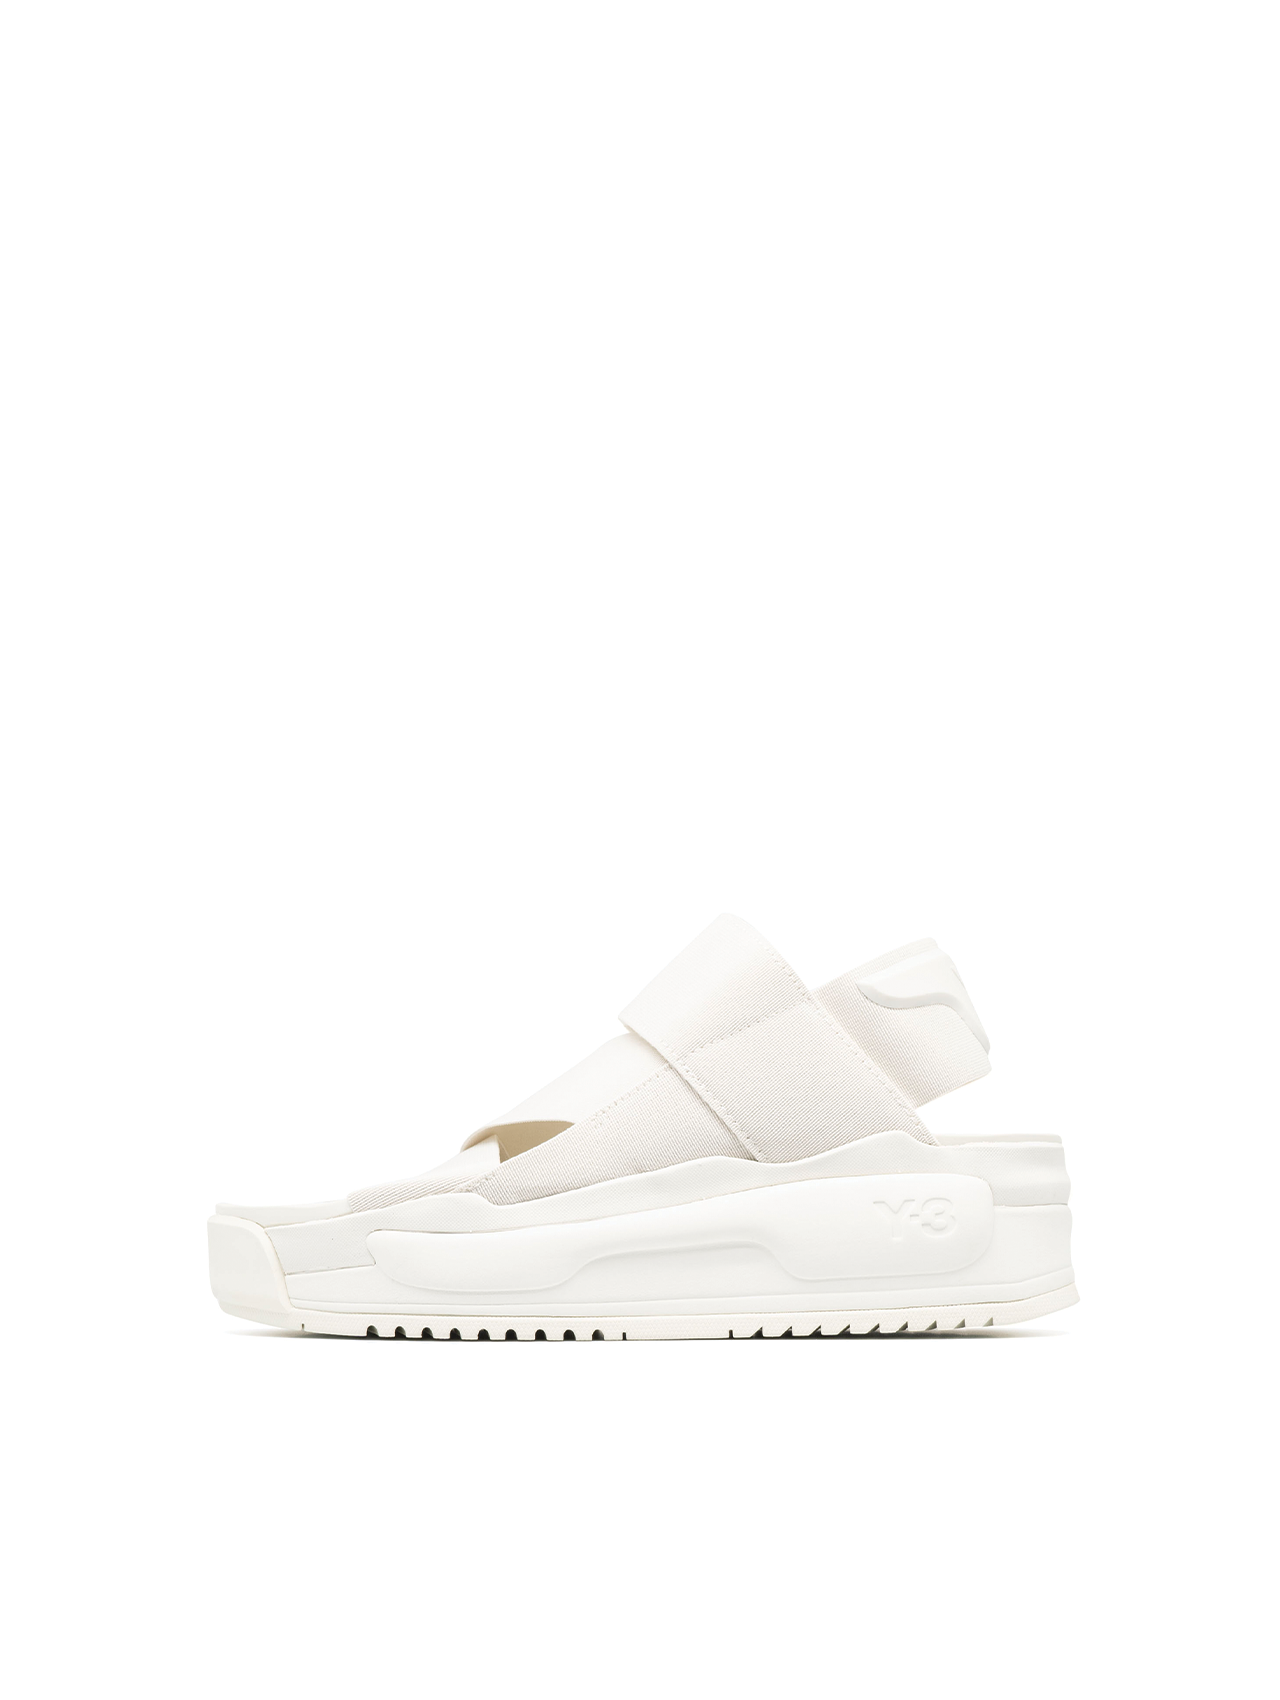 Y-3 Off White Rivalry Sandals